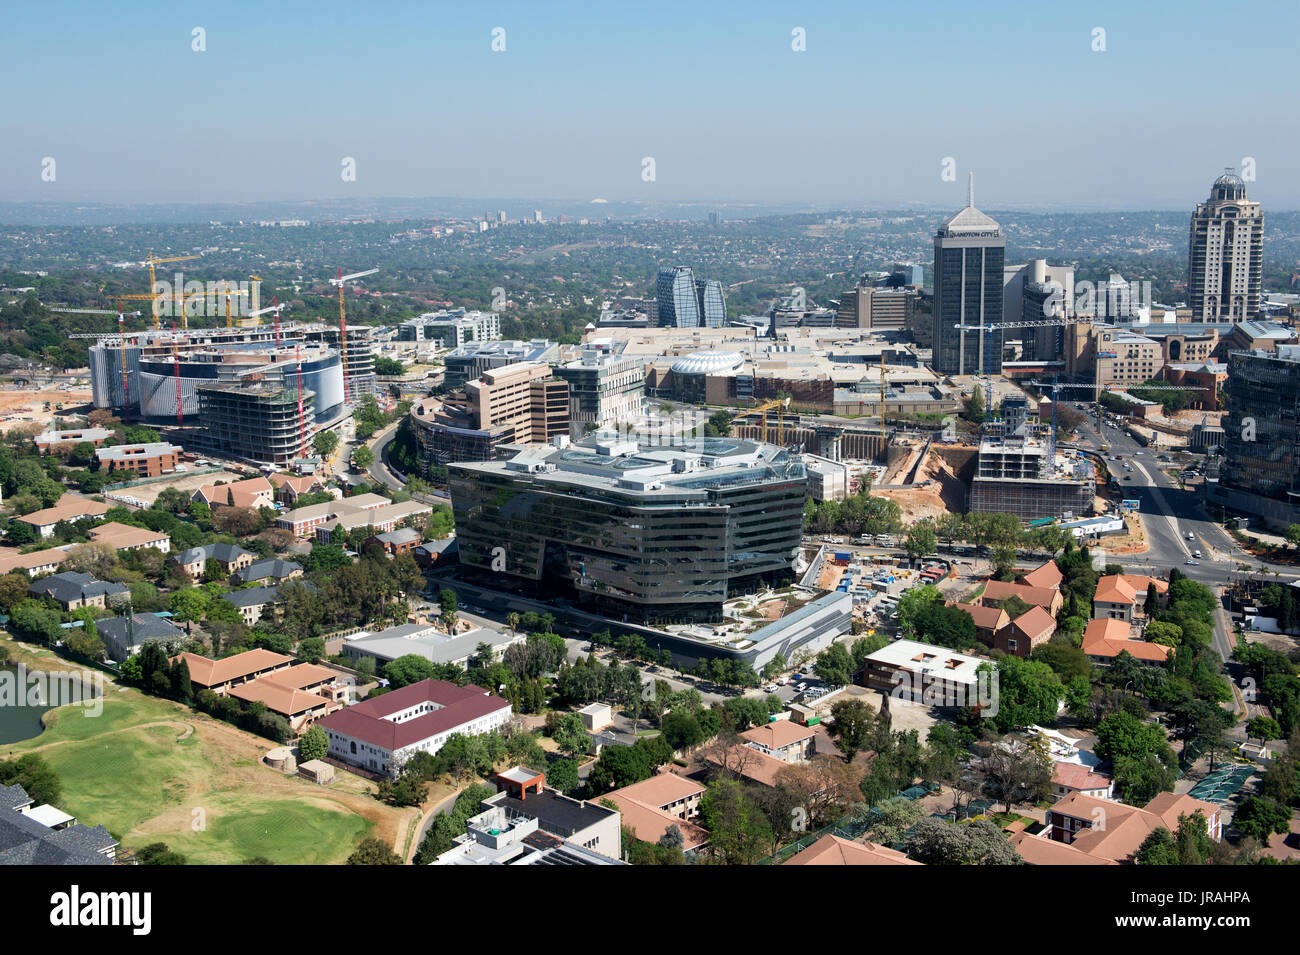 JOHANNESBURG, SOUTH AFRICA - September 24, 2016: Aerial view of the Sandton district under development Stock Photo